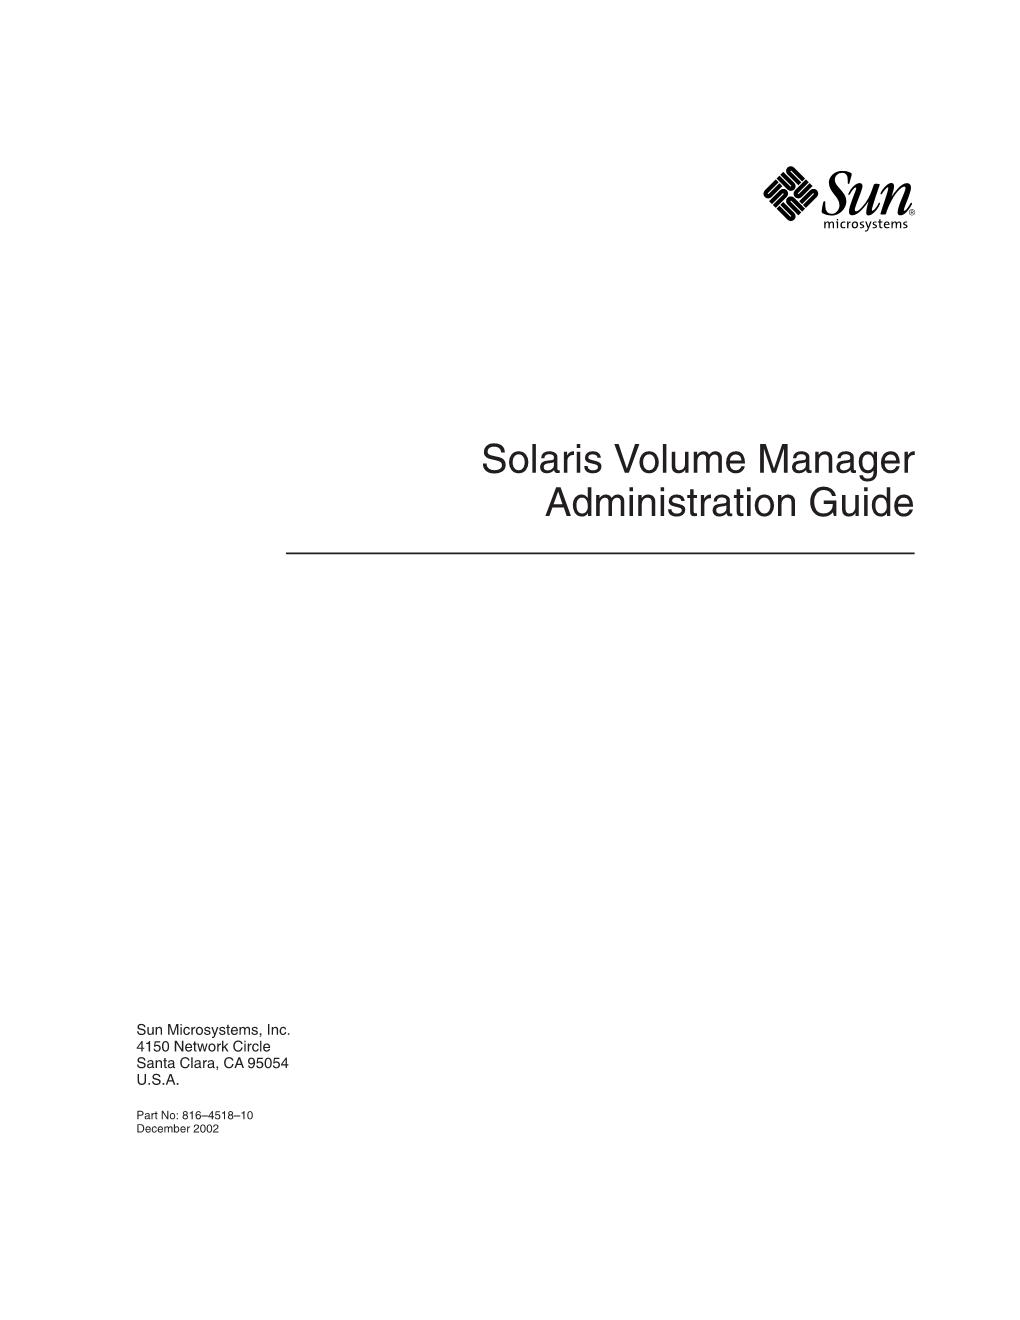 Solaris Volume Manager Administration Guide